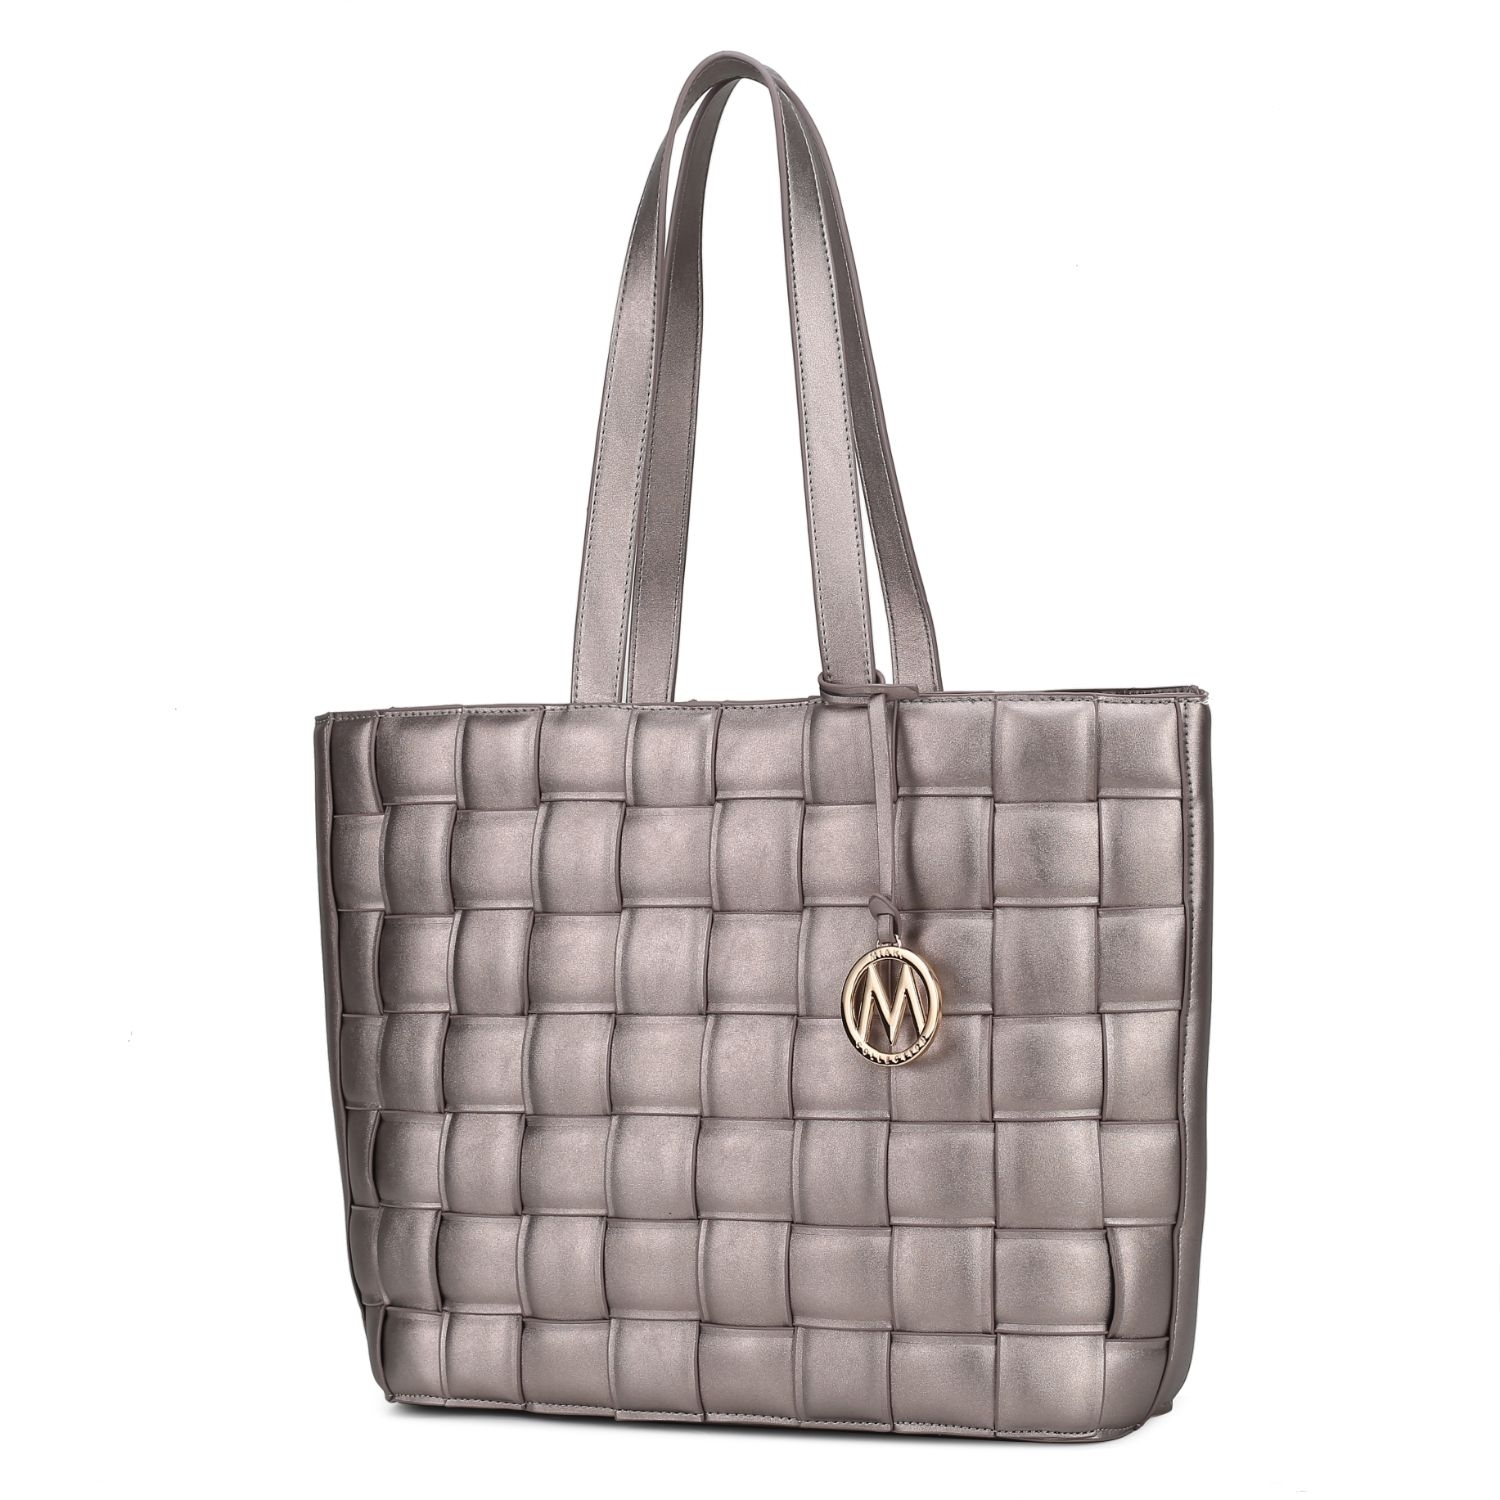 MKF Collection Rowan Woven Vegan Leather Women's Tote Bag By Mia K - Pewter